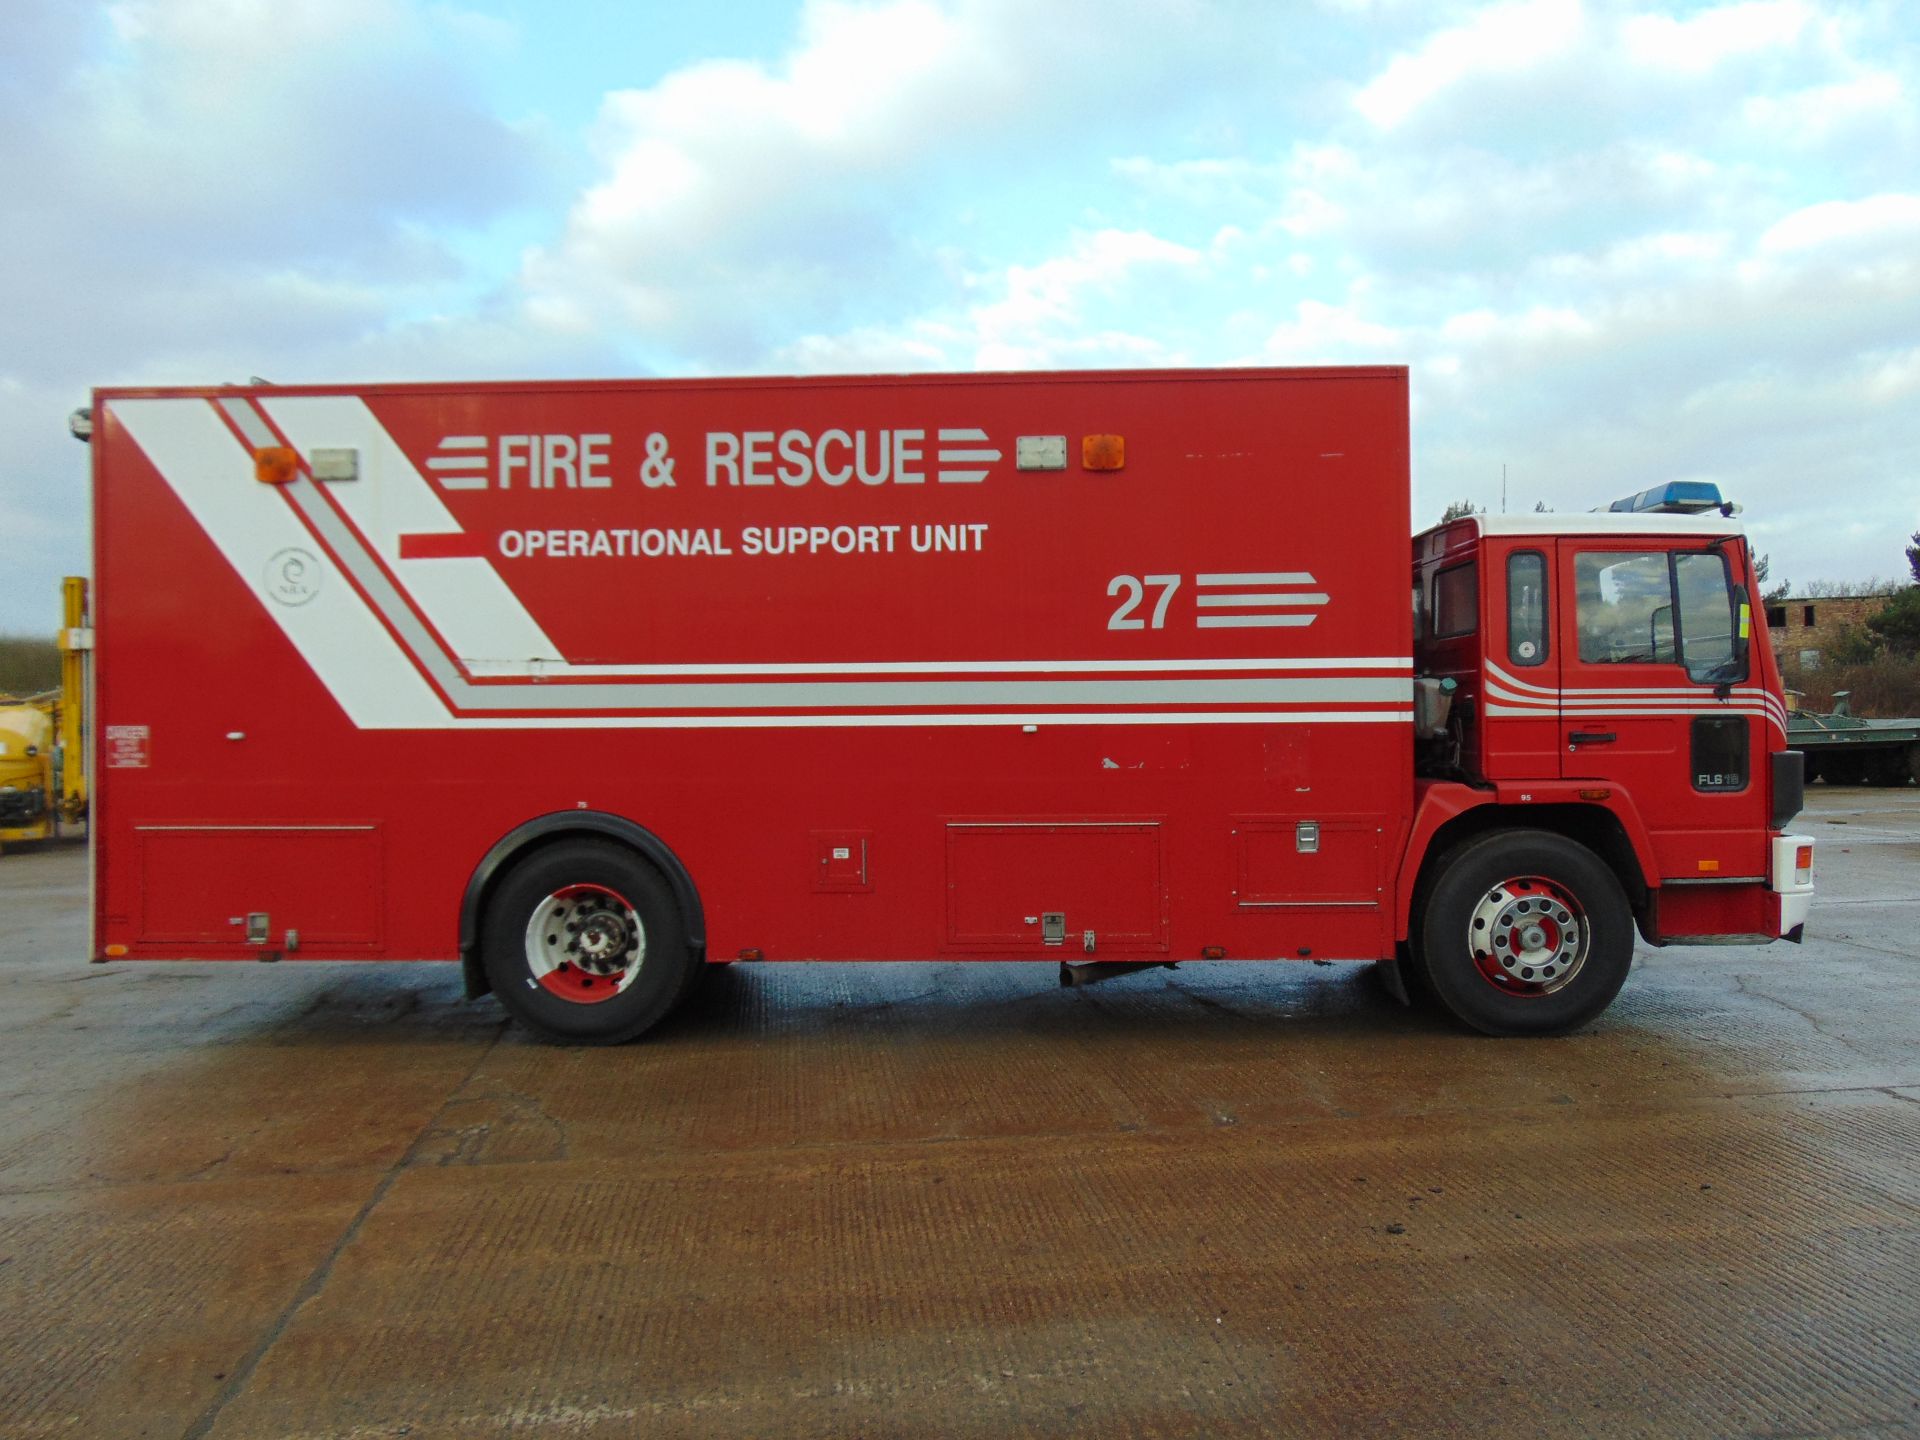 1993 Volvo FL6 18 4 x 2 Incident Response Unit complete with a 1000 Kg Tail Lift - Image 5 of 37